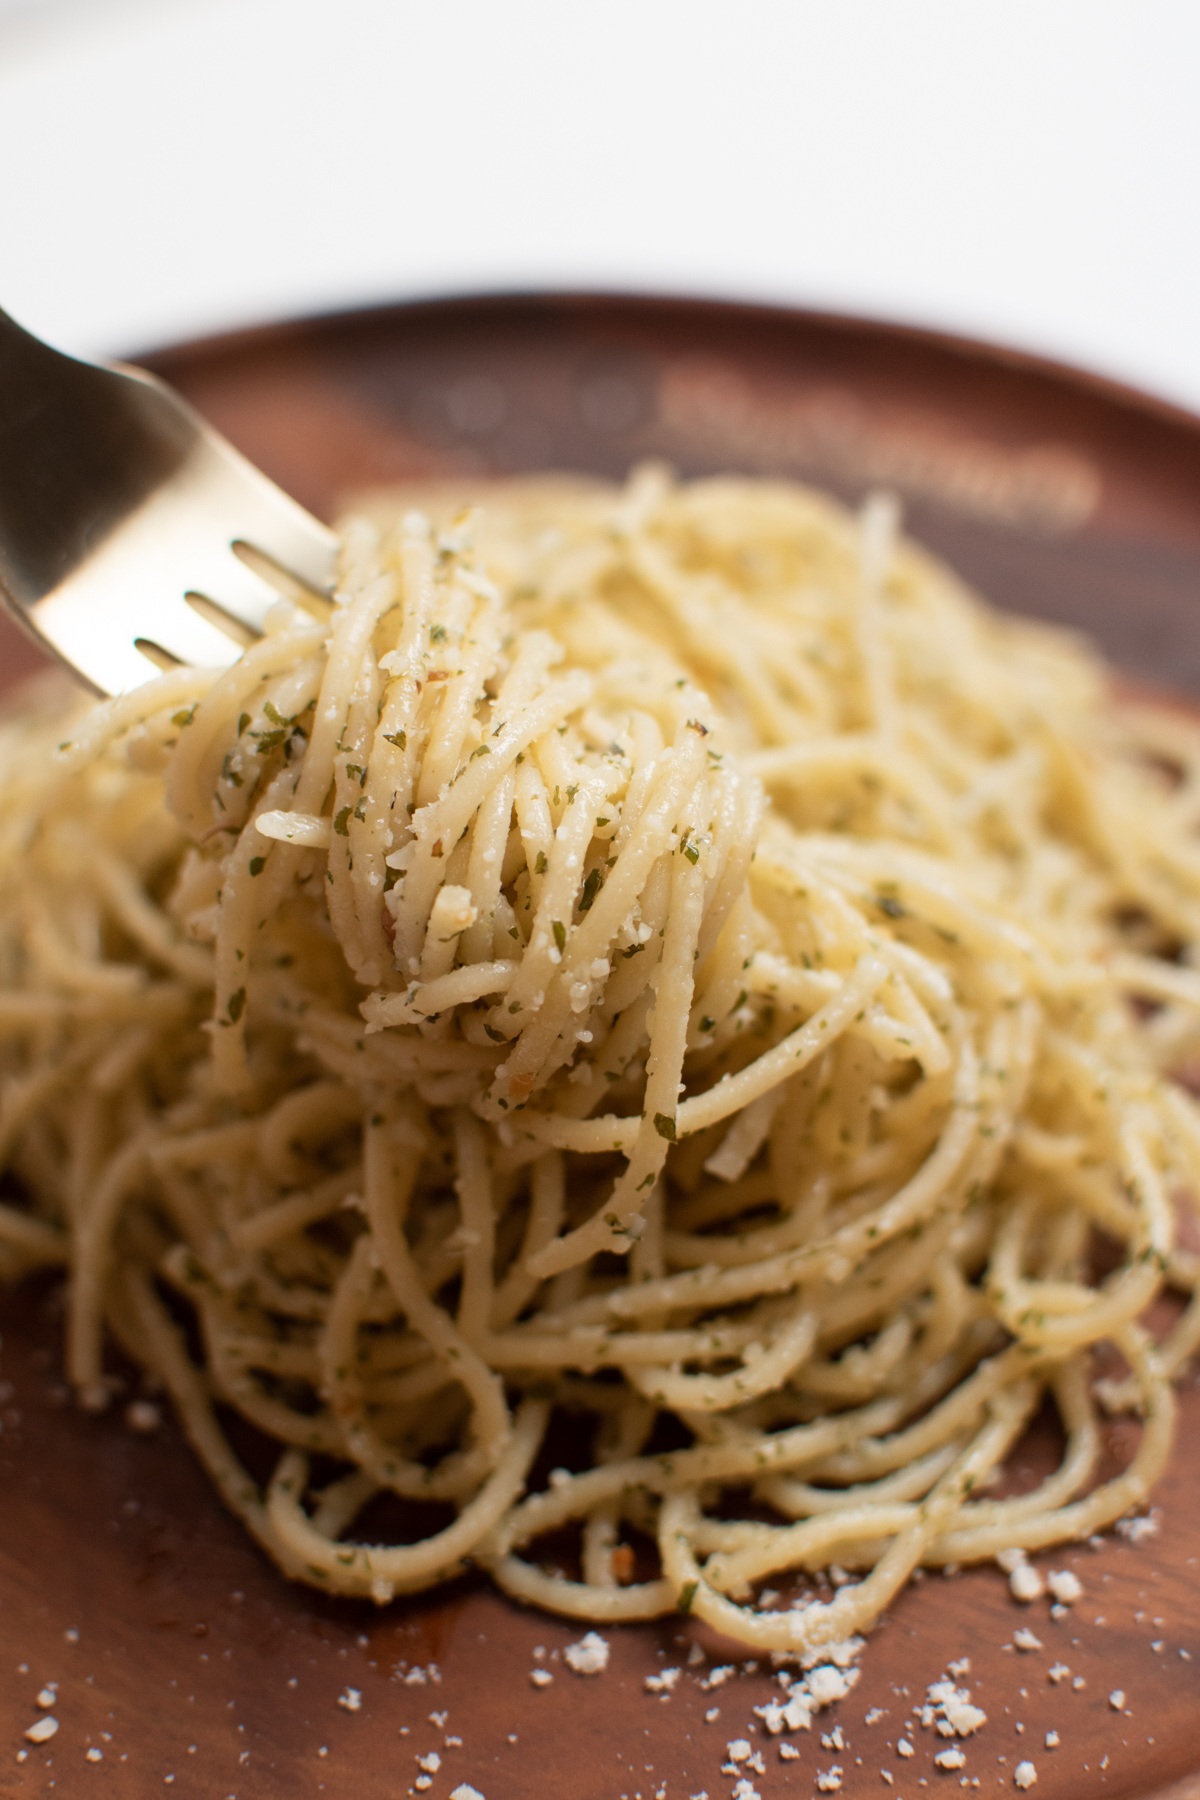 Forkful of cooked garlic spaghetti with Italian seasonings and parmesan on wooden plate.